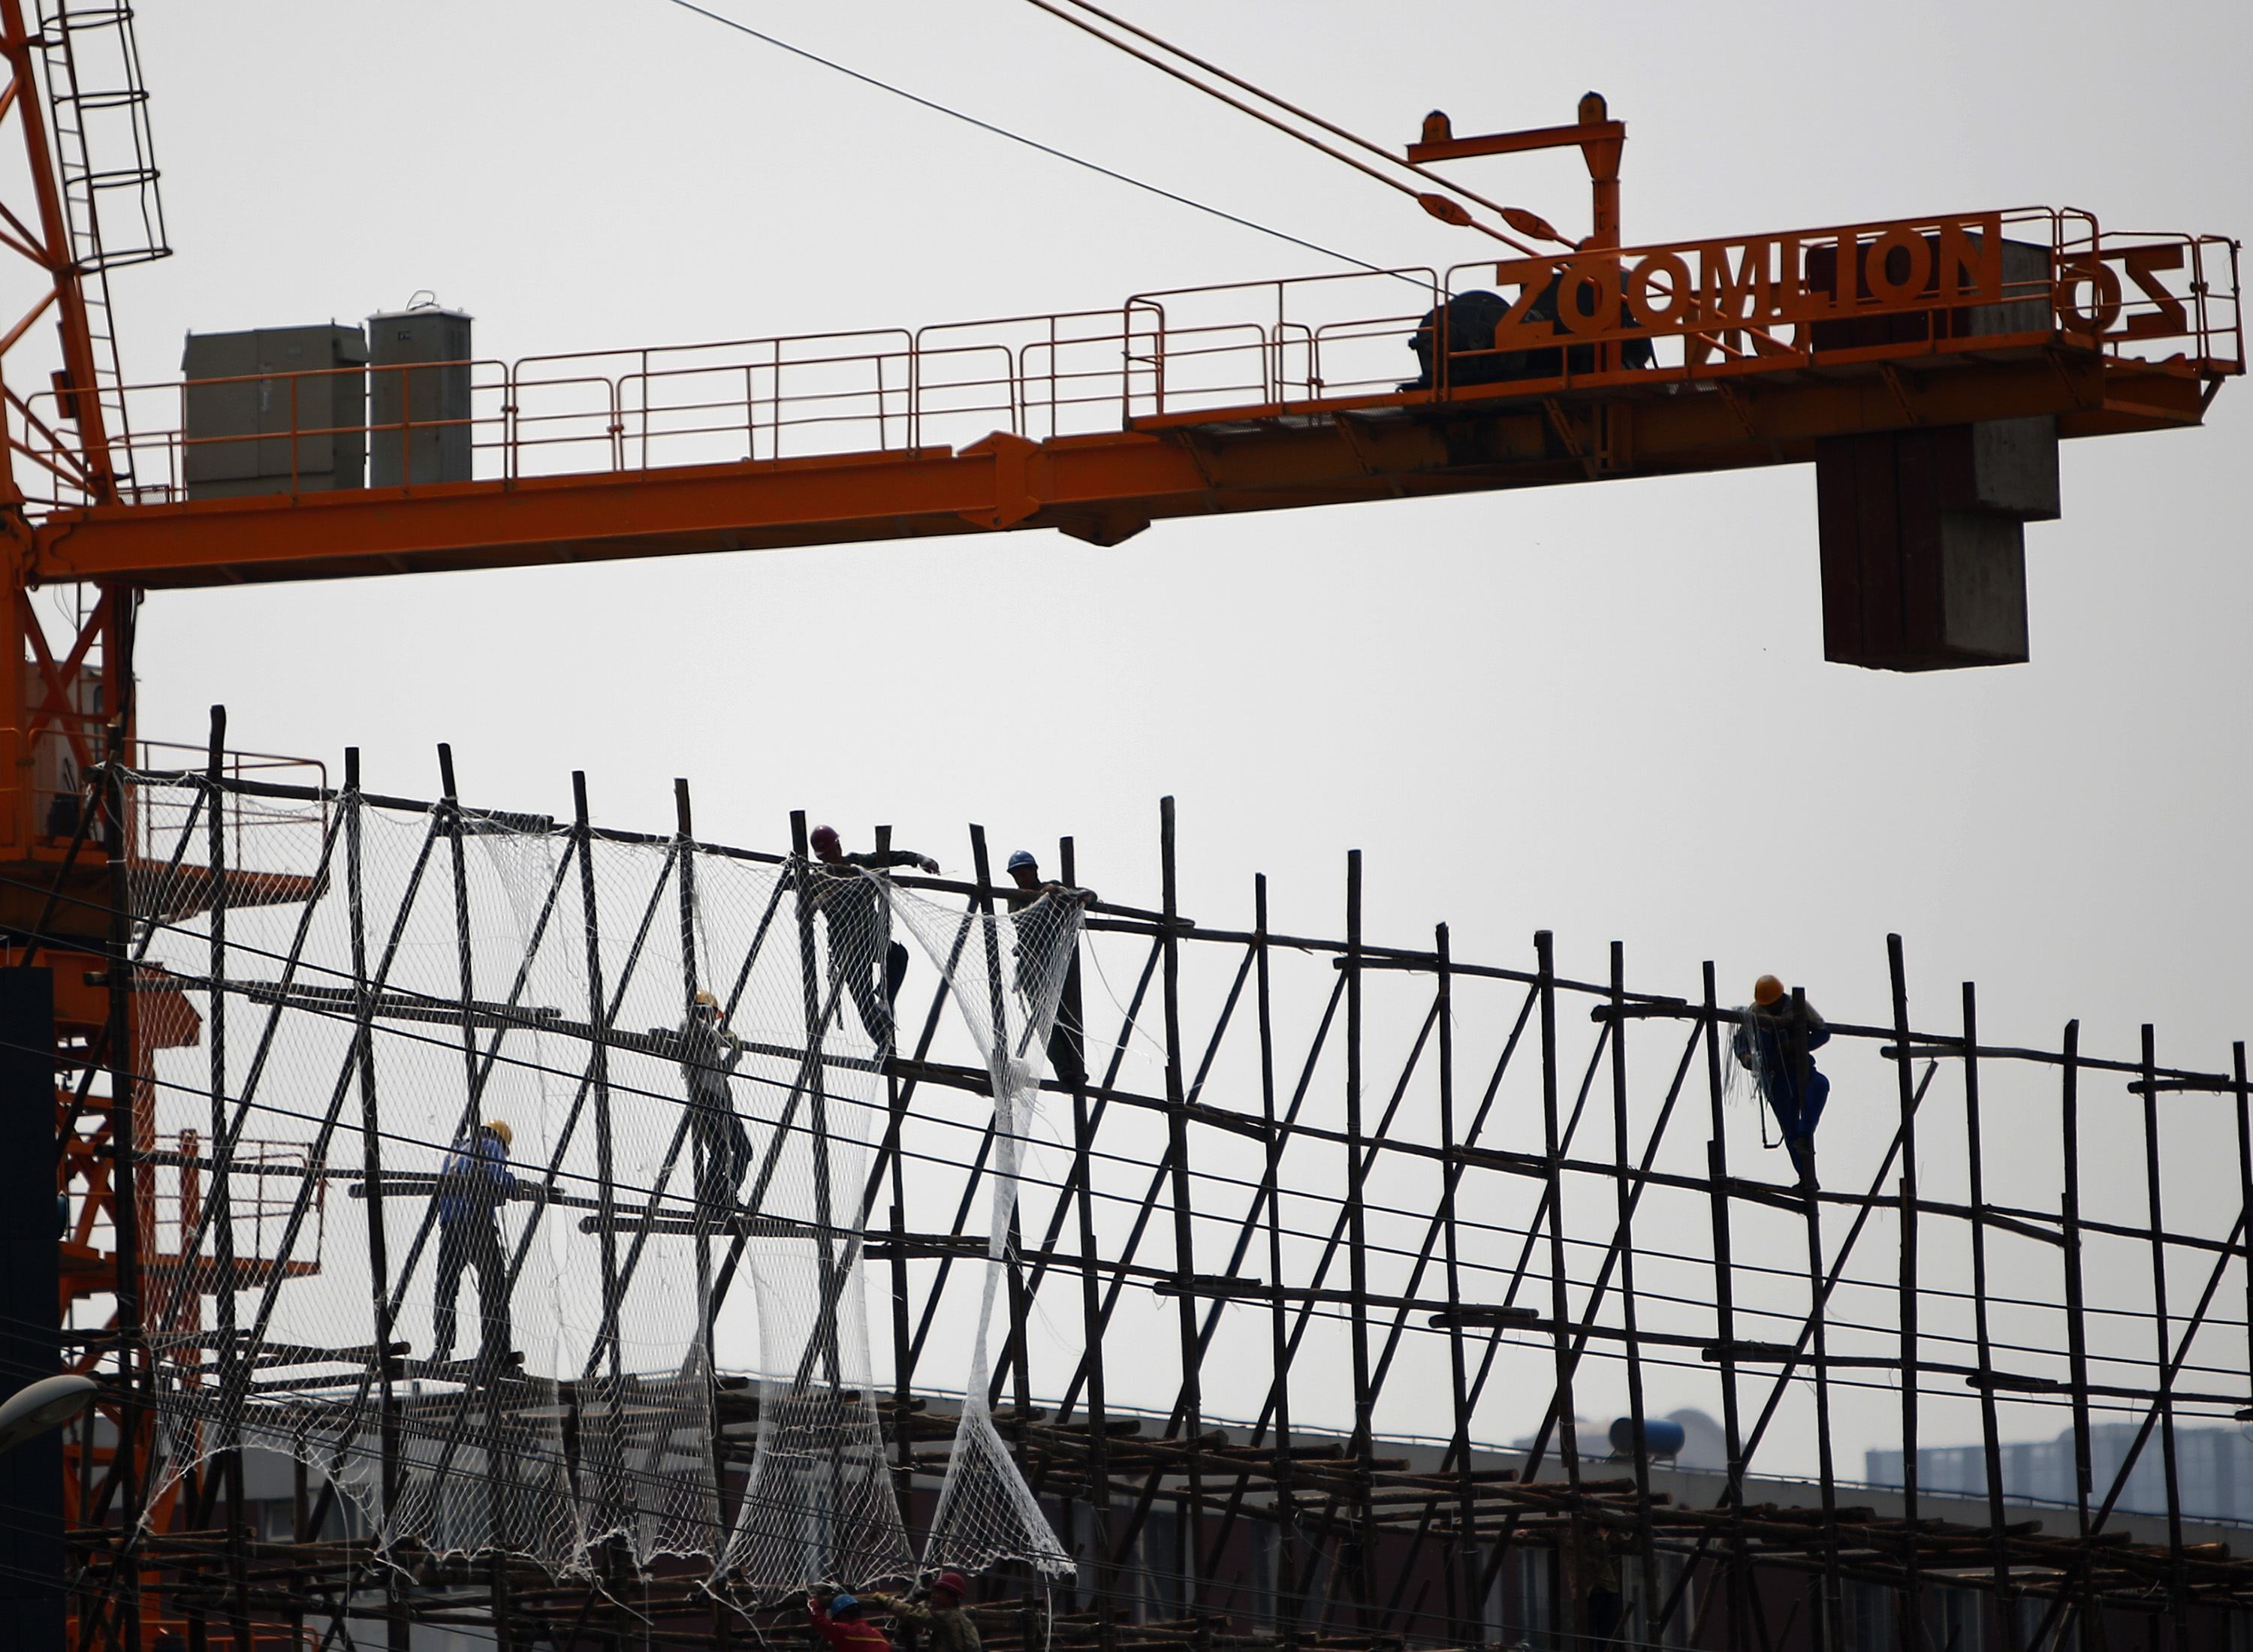 A weak residential property market could affect construction and demand for land. Photo: Reuters